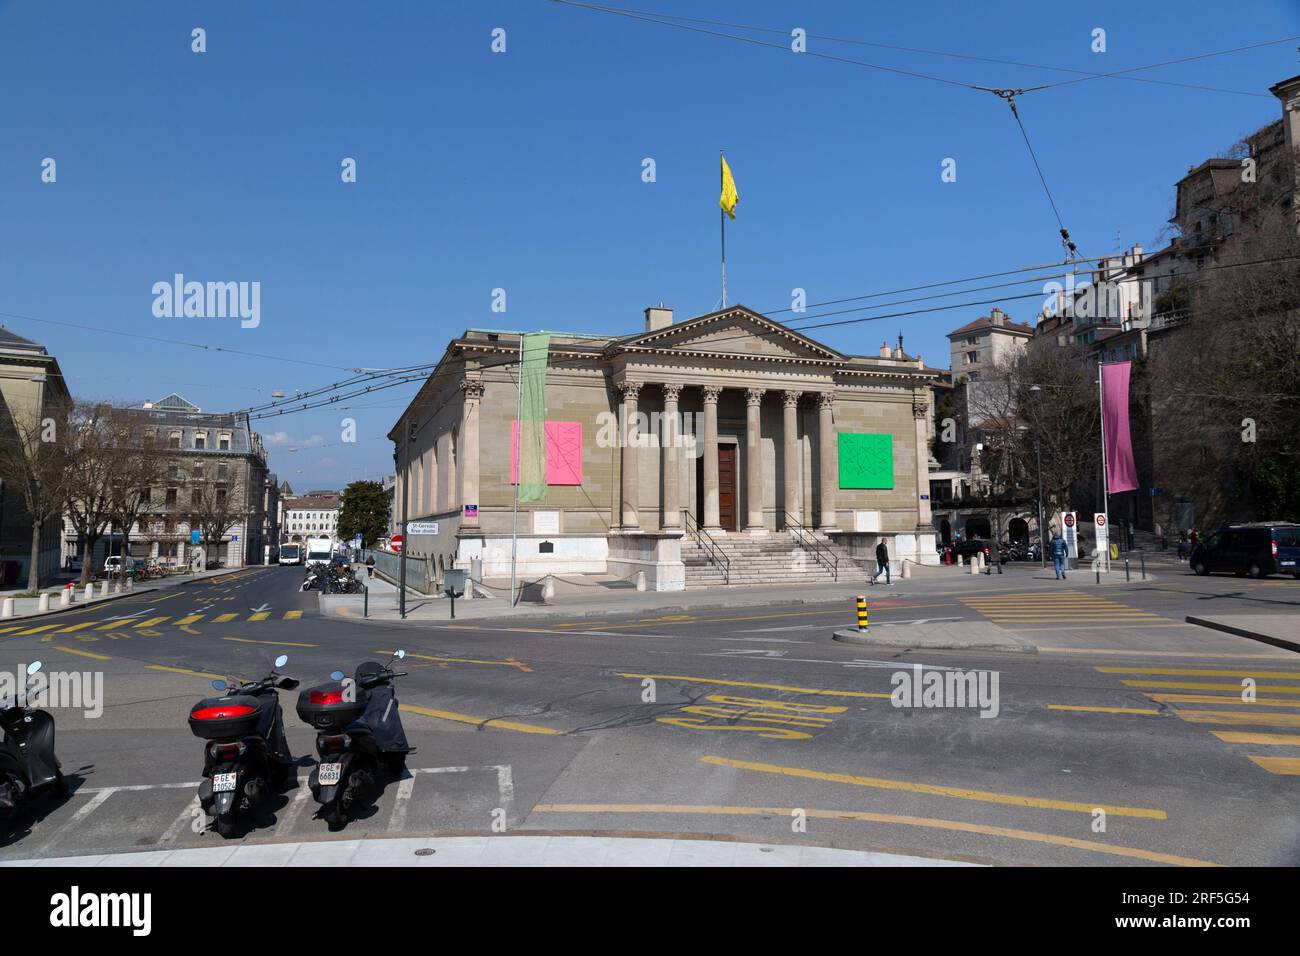 Geneva, Switzerland - 25 March 2022: Place Neuve is one of the main squares in the city of Geneva. Its current official name is Place de Neuve, named Stock Photo